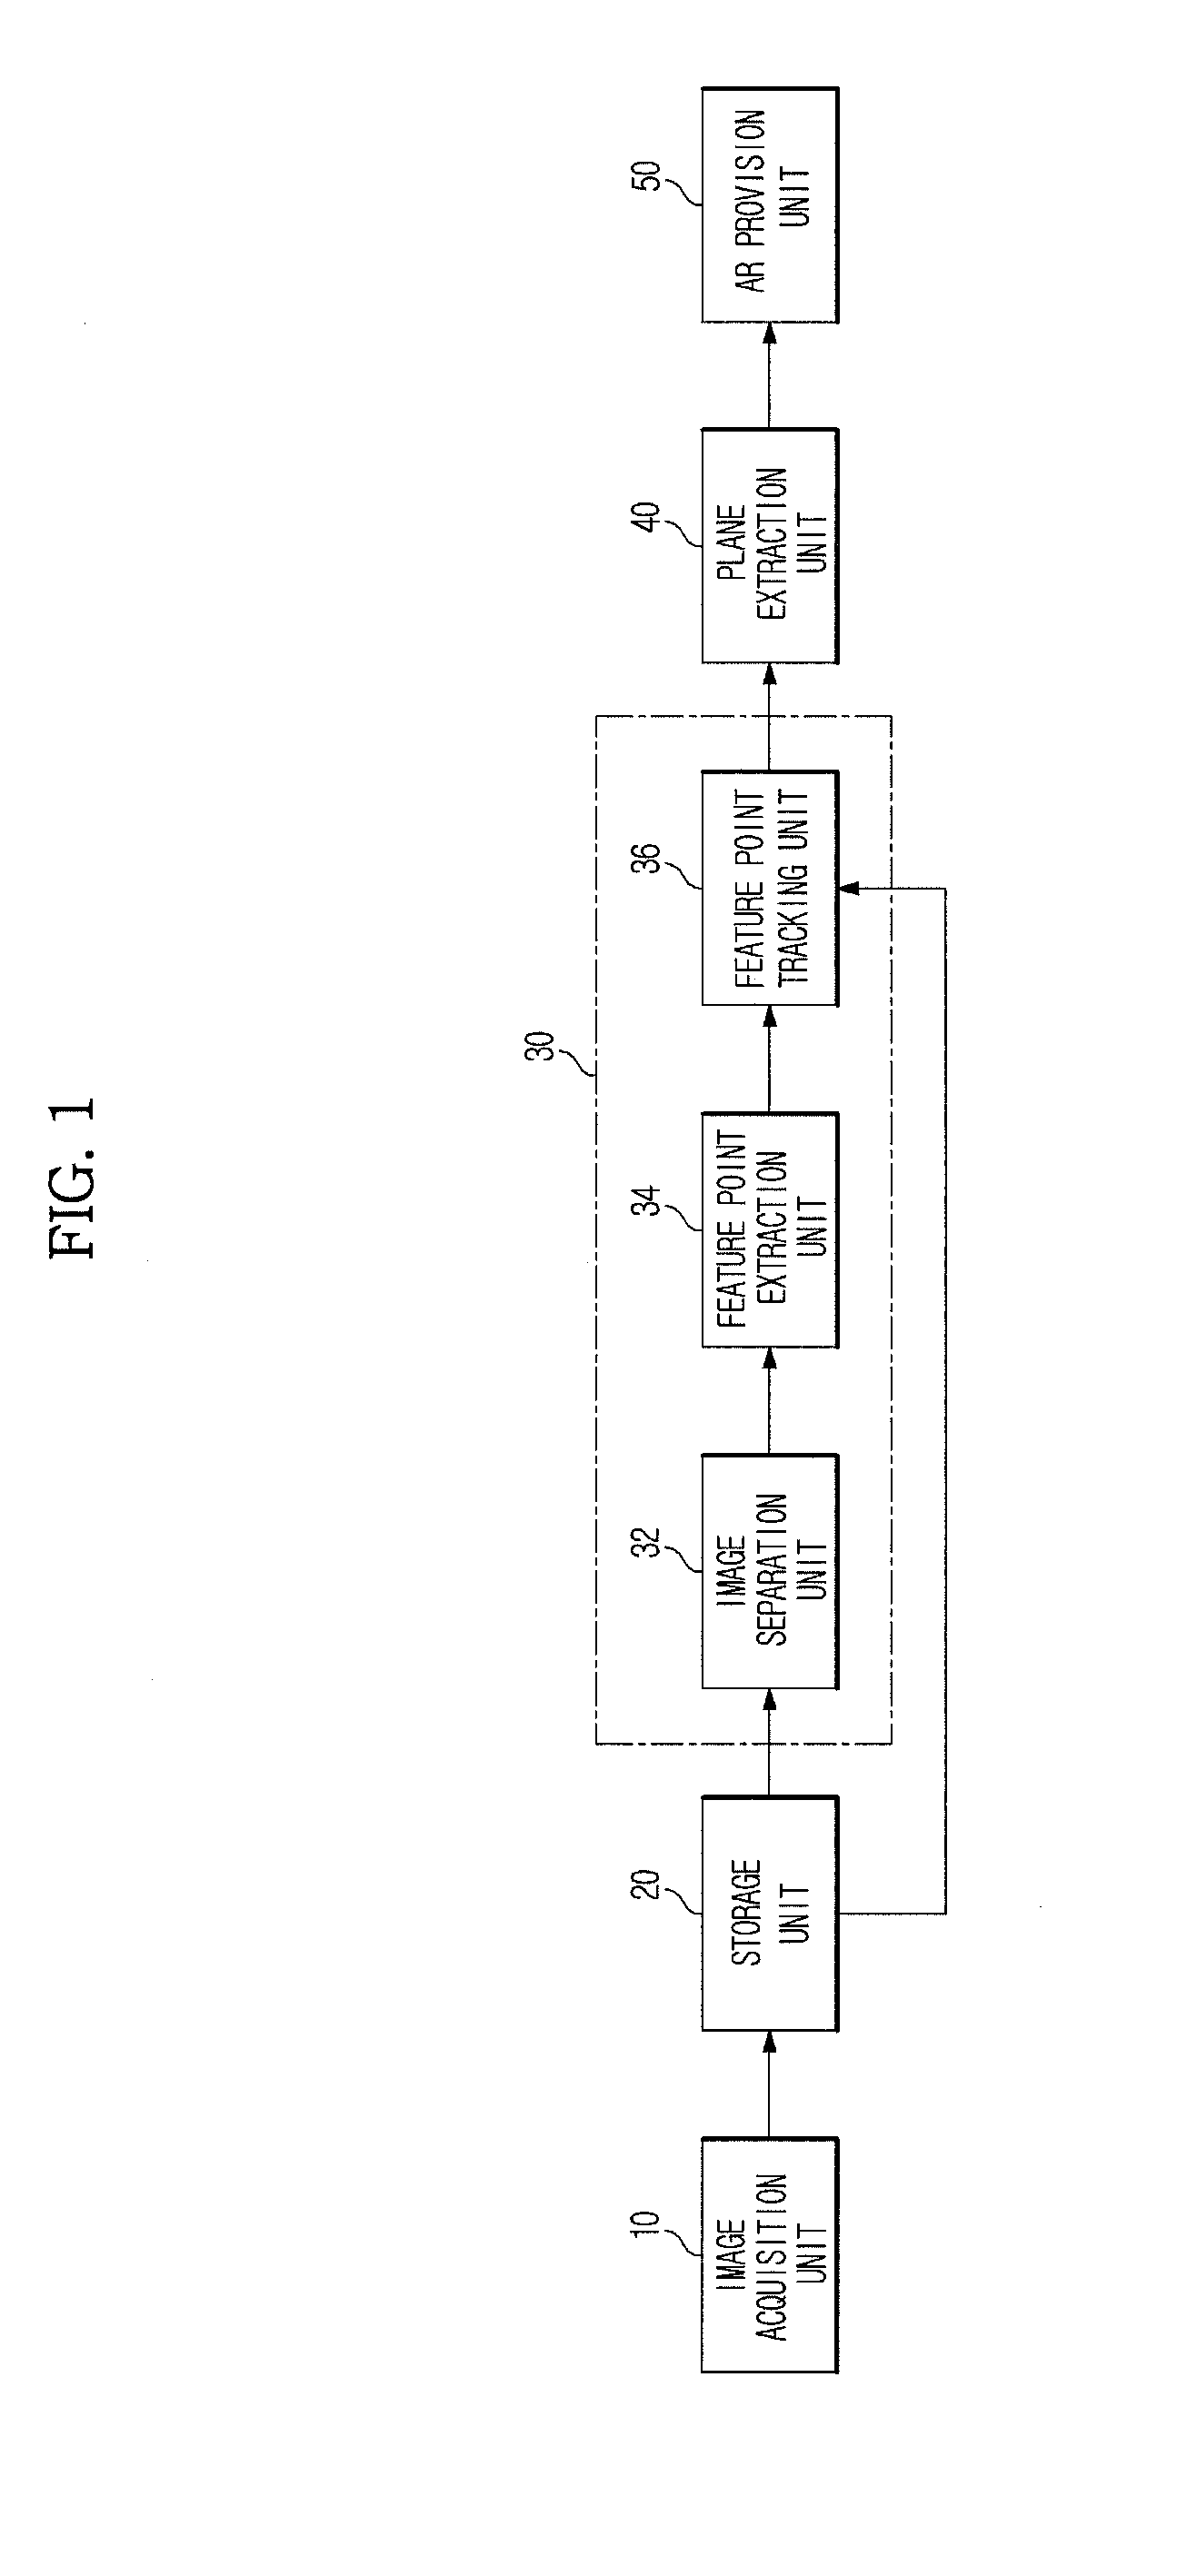 Markerless augmented reality system and method using projective invariant